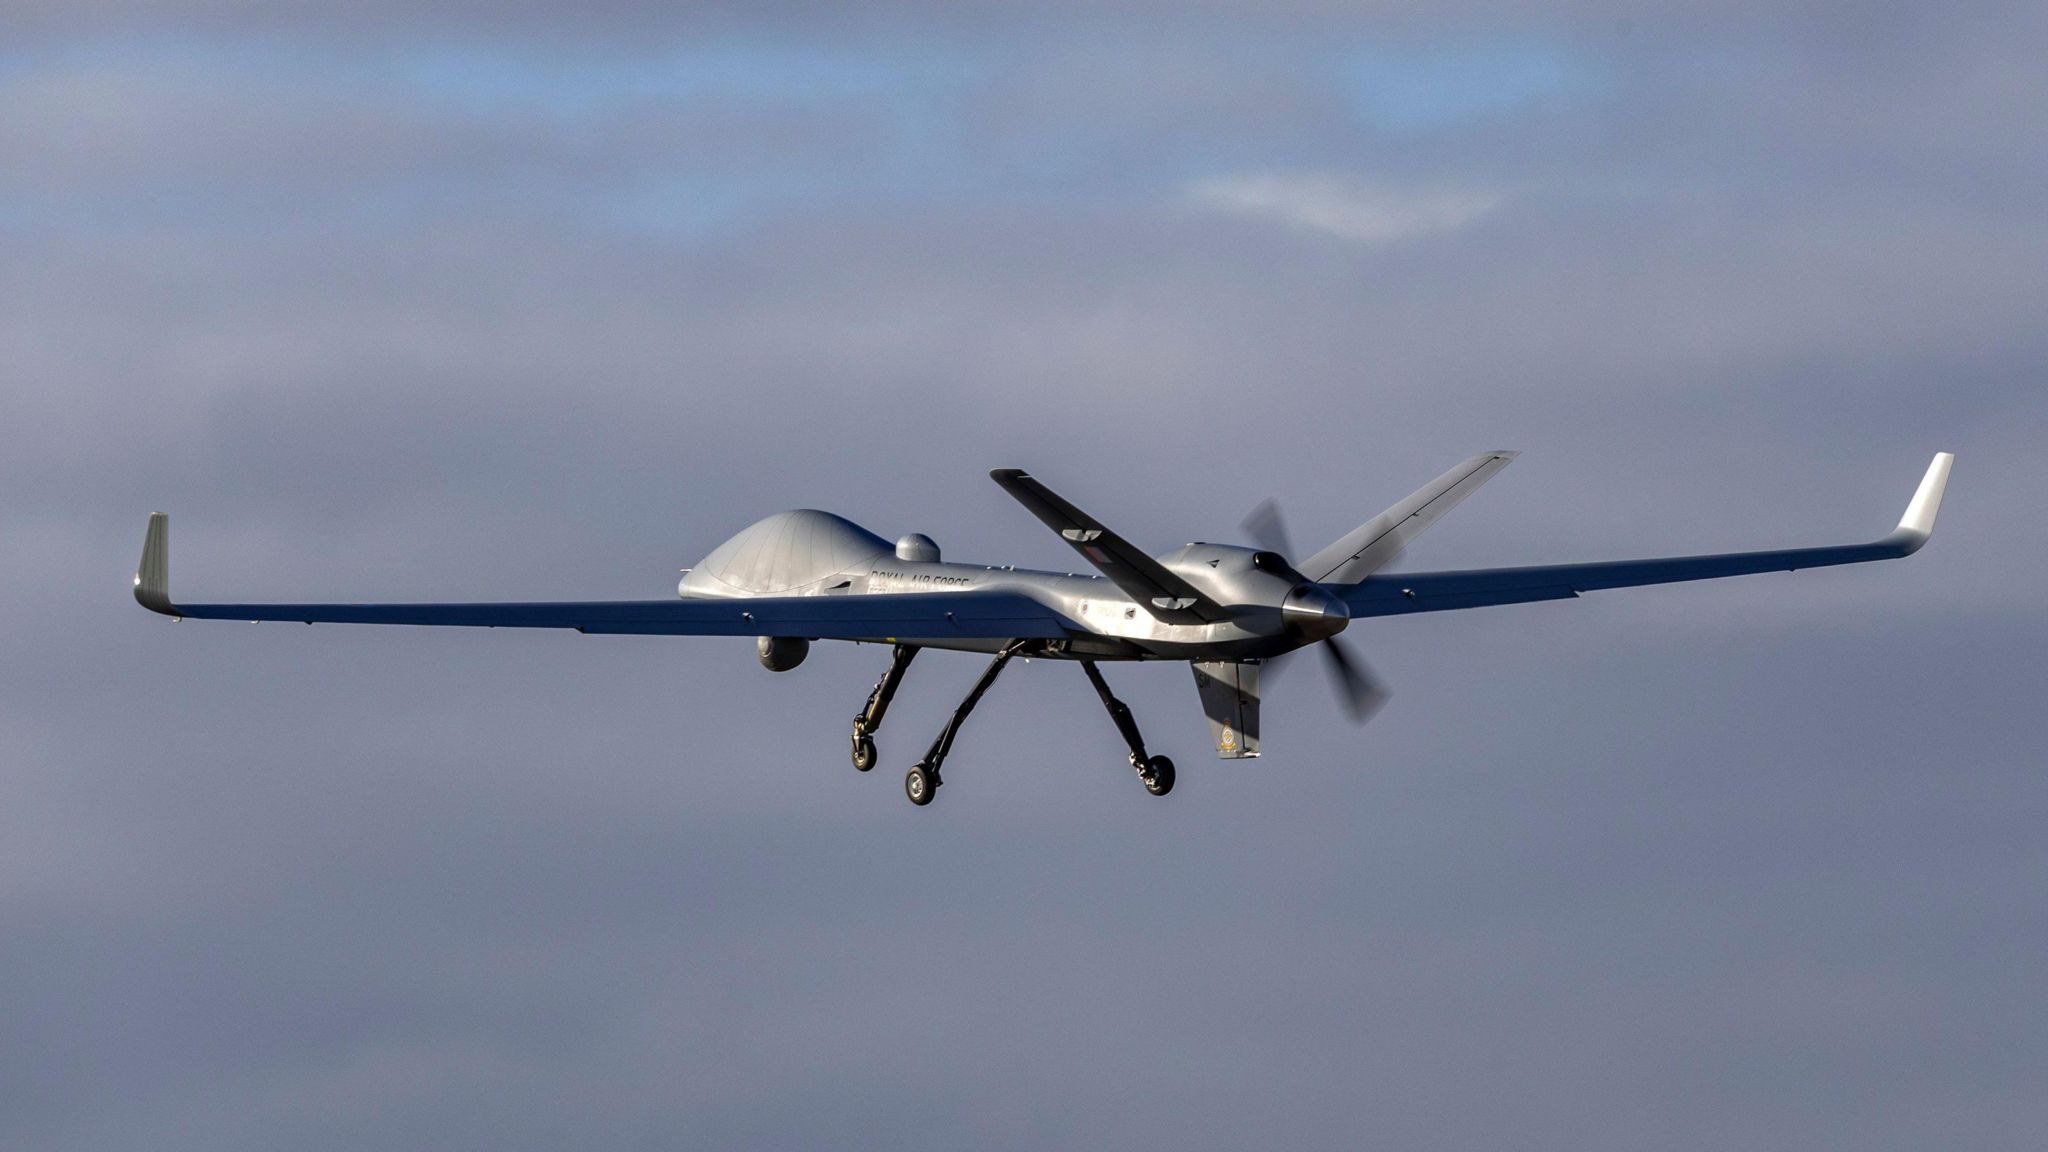 A remotely operated surveillance drone mid-flight at RAF Waddington on an cloudy day